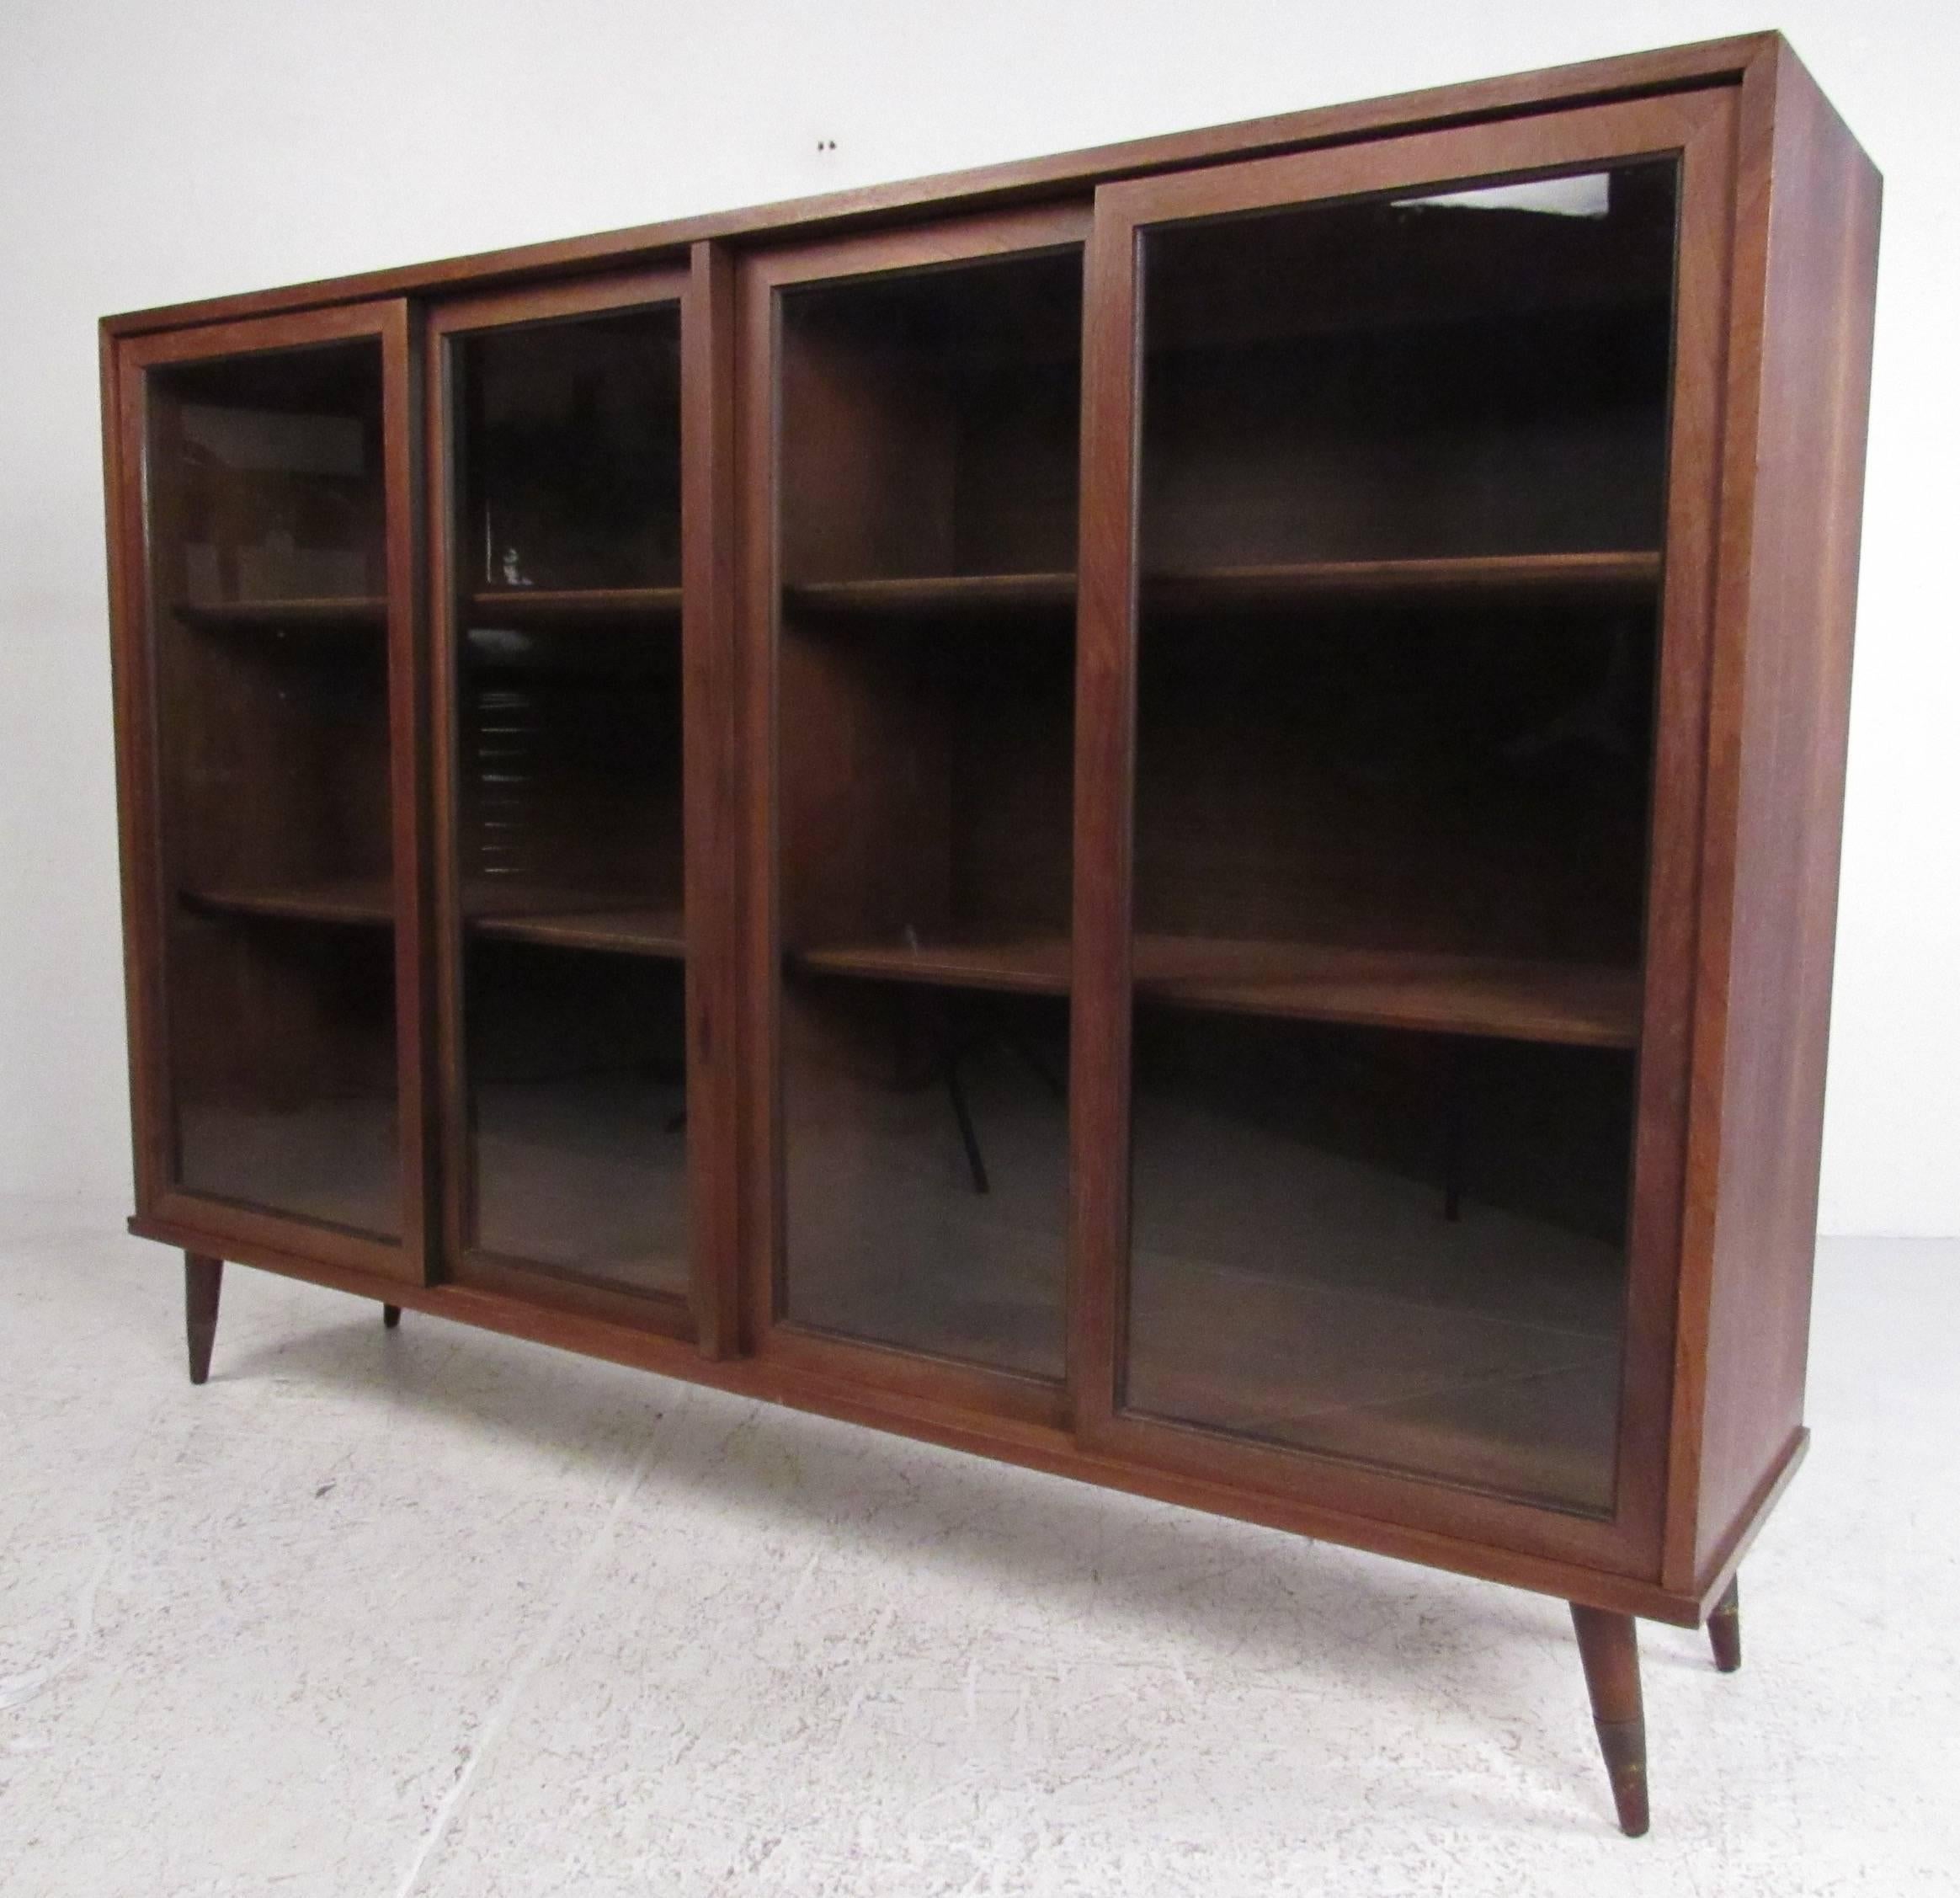 American walnut sliding door china cabinet with two display shelves. Please confirm item location (NY or NJ) with dealer.

 